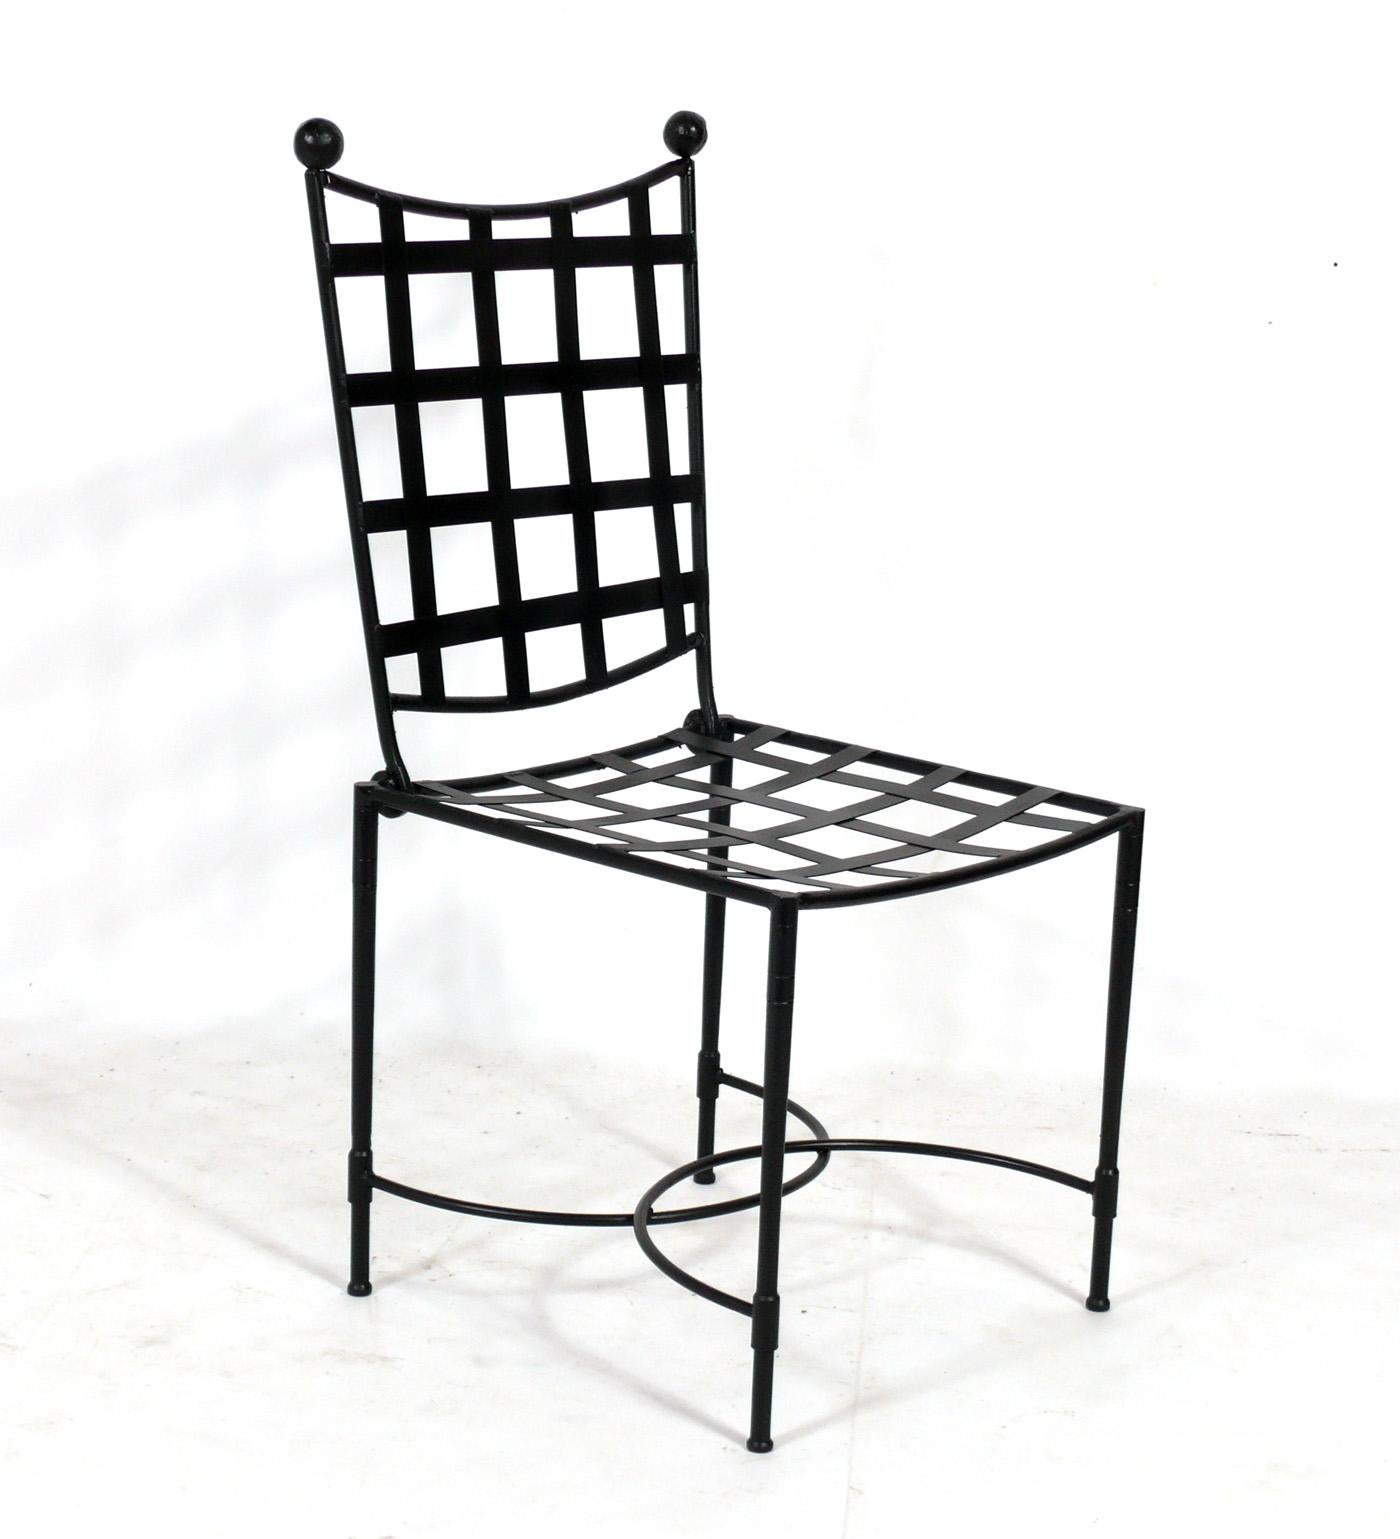 Set of Four Sculptural Iron Dining Chairs, design attributed to Mario Papperzini, and made by Salterini, American, circa 1960s. They can be used indoors or outdoors and have been repainted and are ready to use.